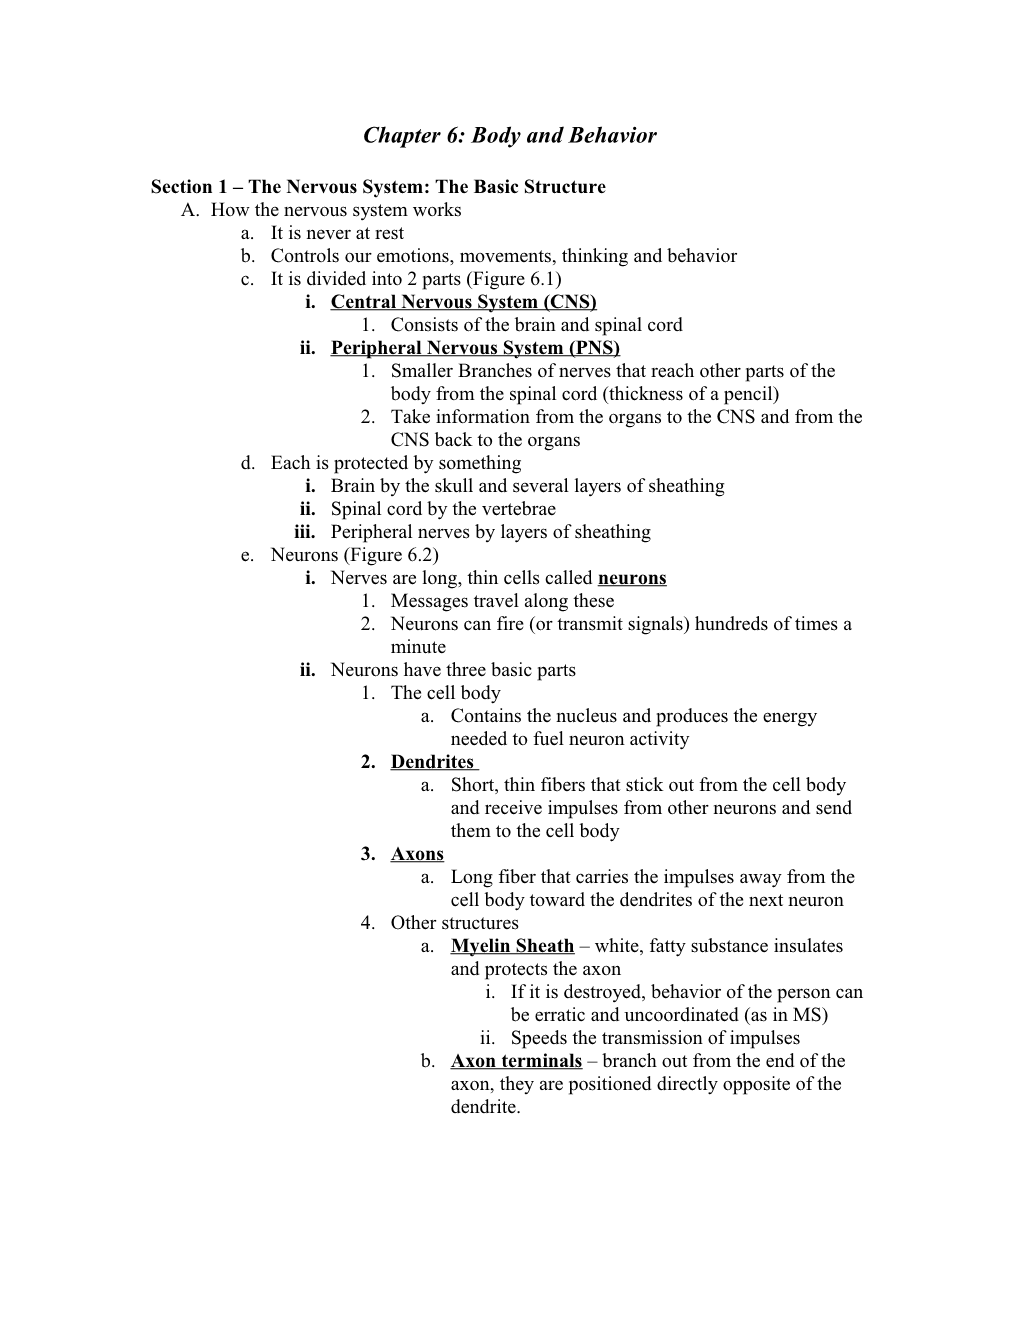 Chapter 6 Notes and Chapter 7 Notes